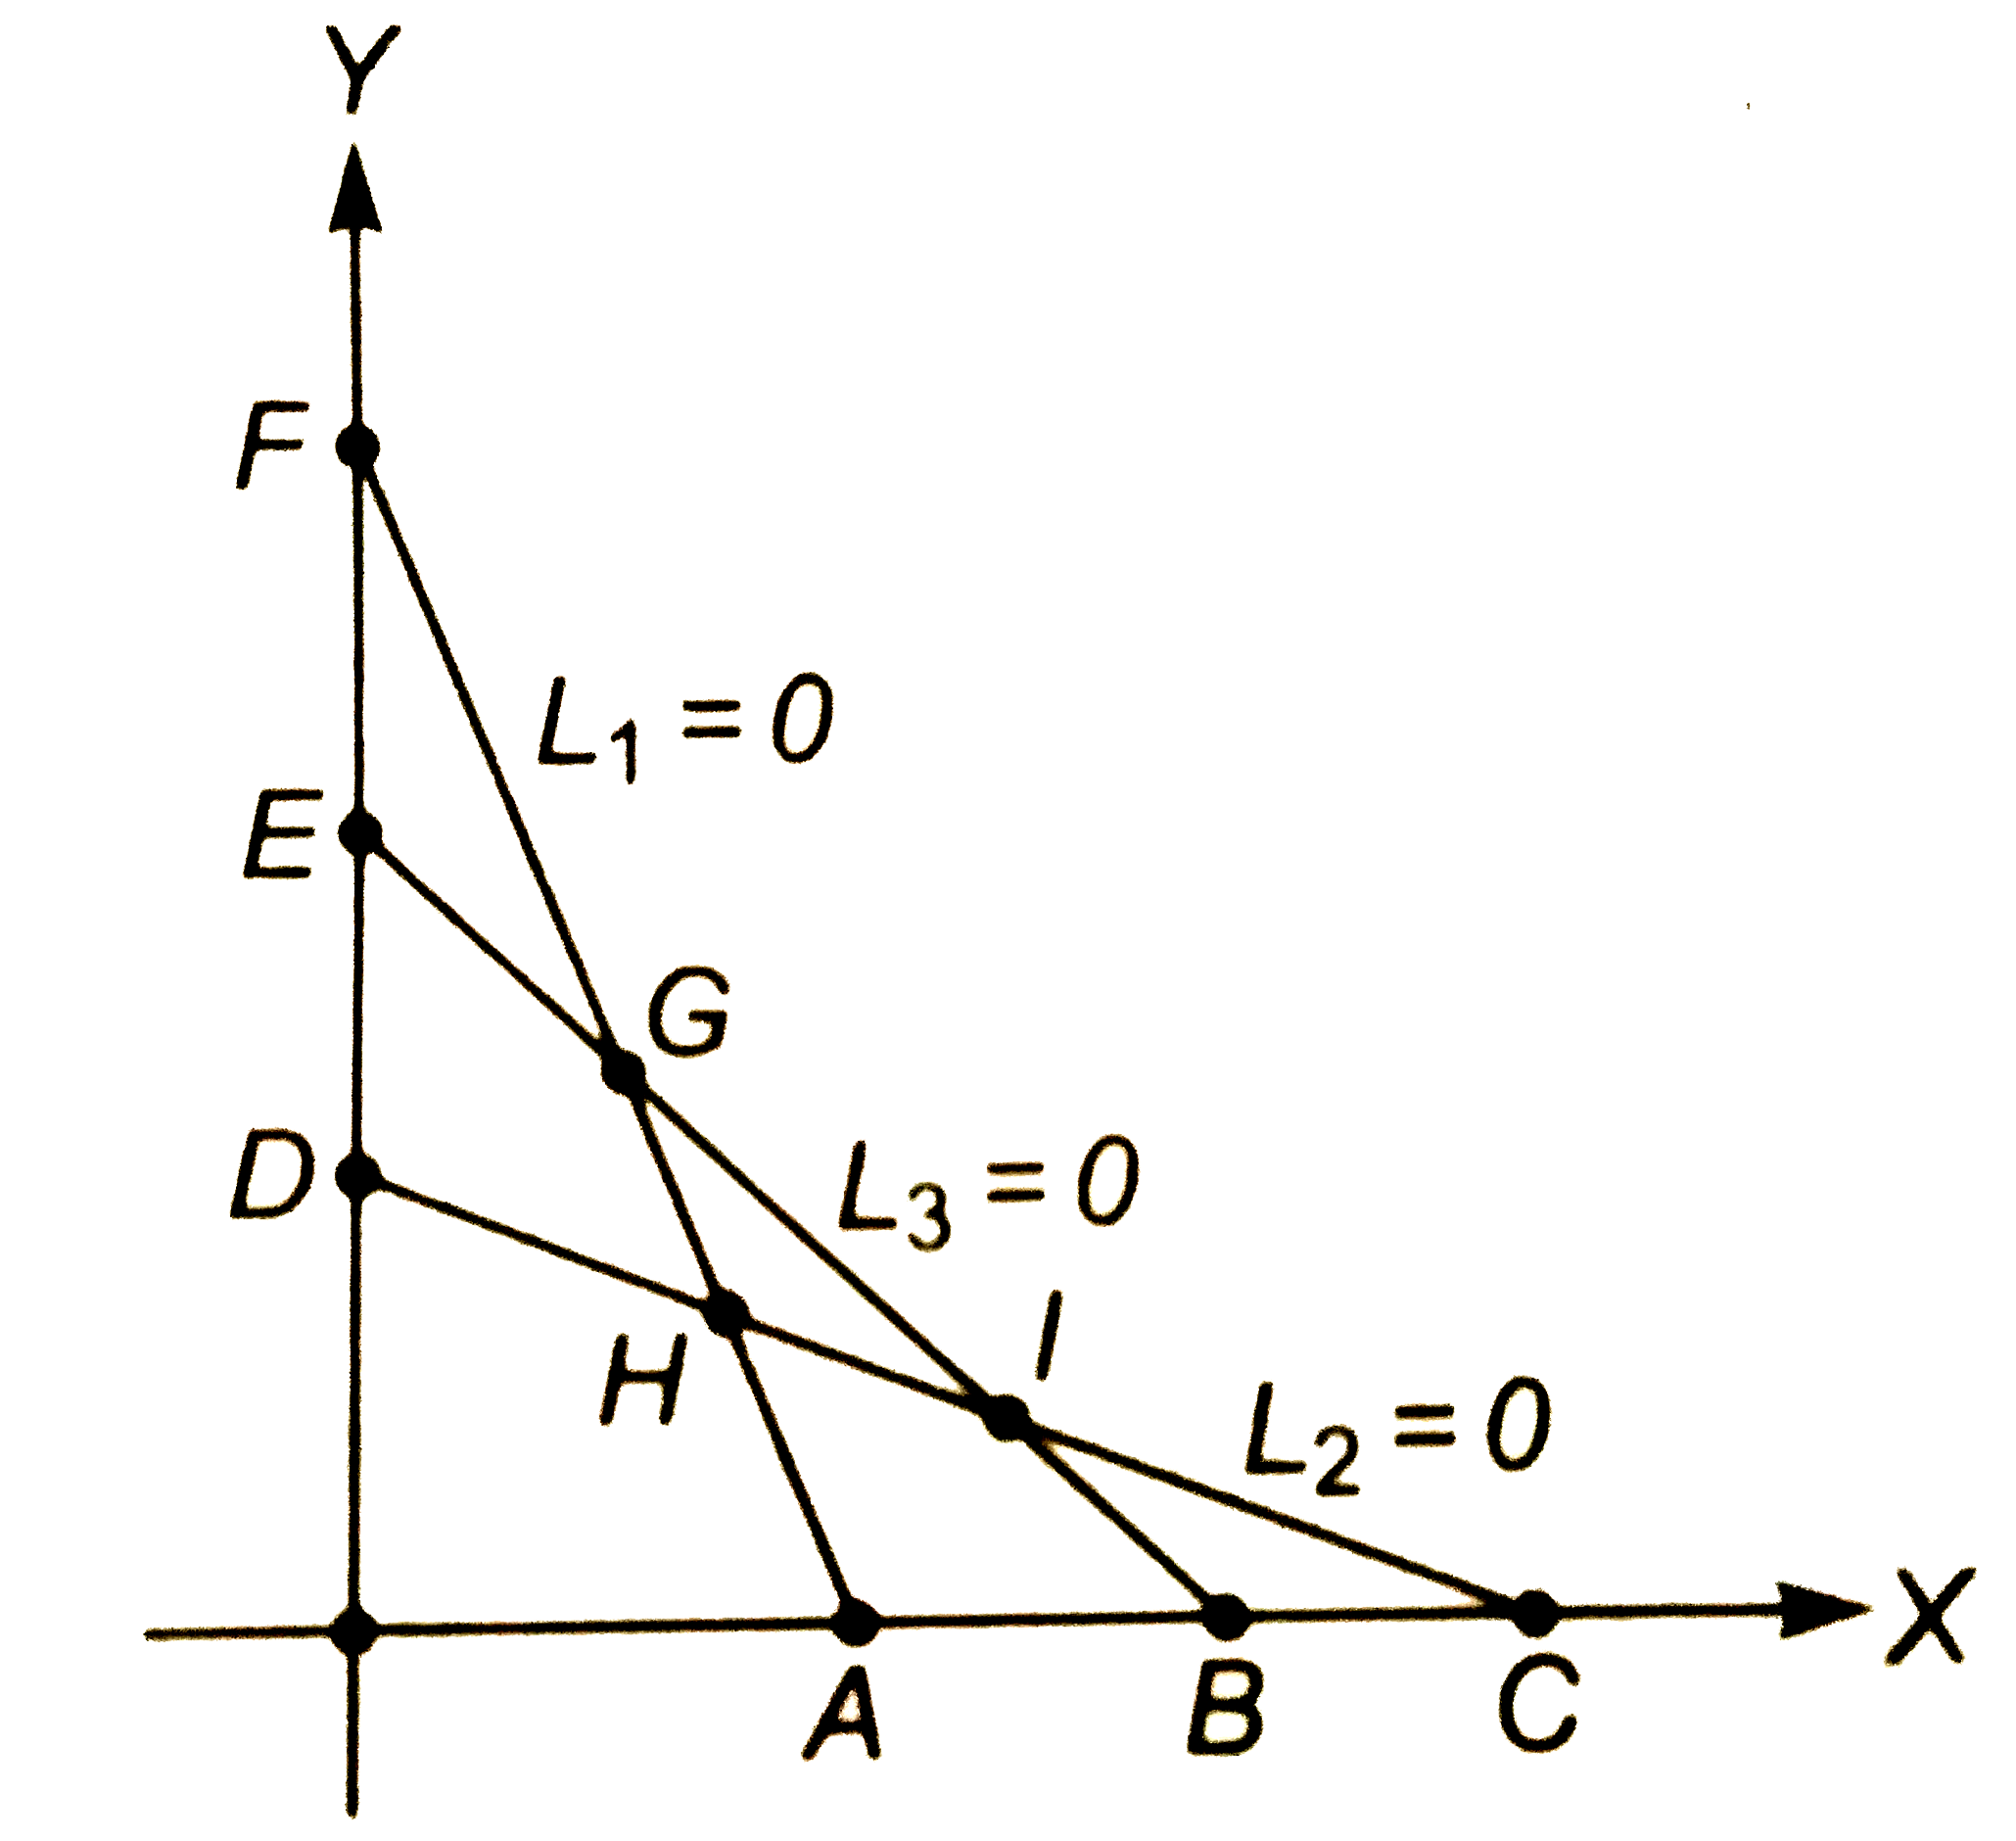 The feasible for the following constraints L(1) le 0, L(2) ge 0, L(3)=0, x ge 0, yge 0 in the diagram shown is